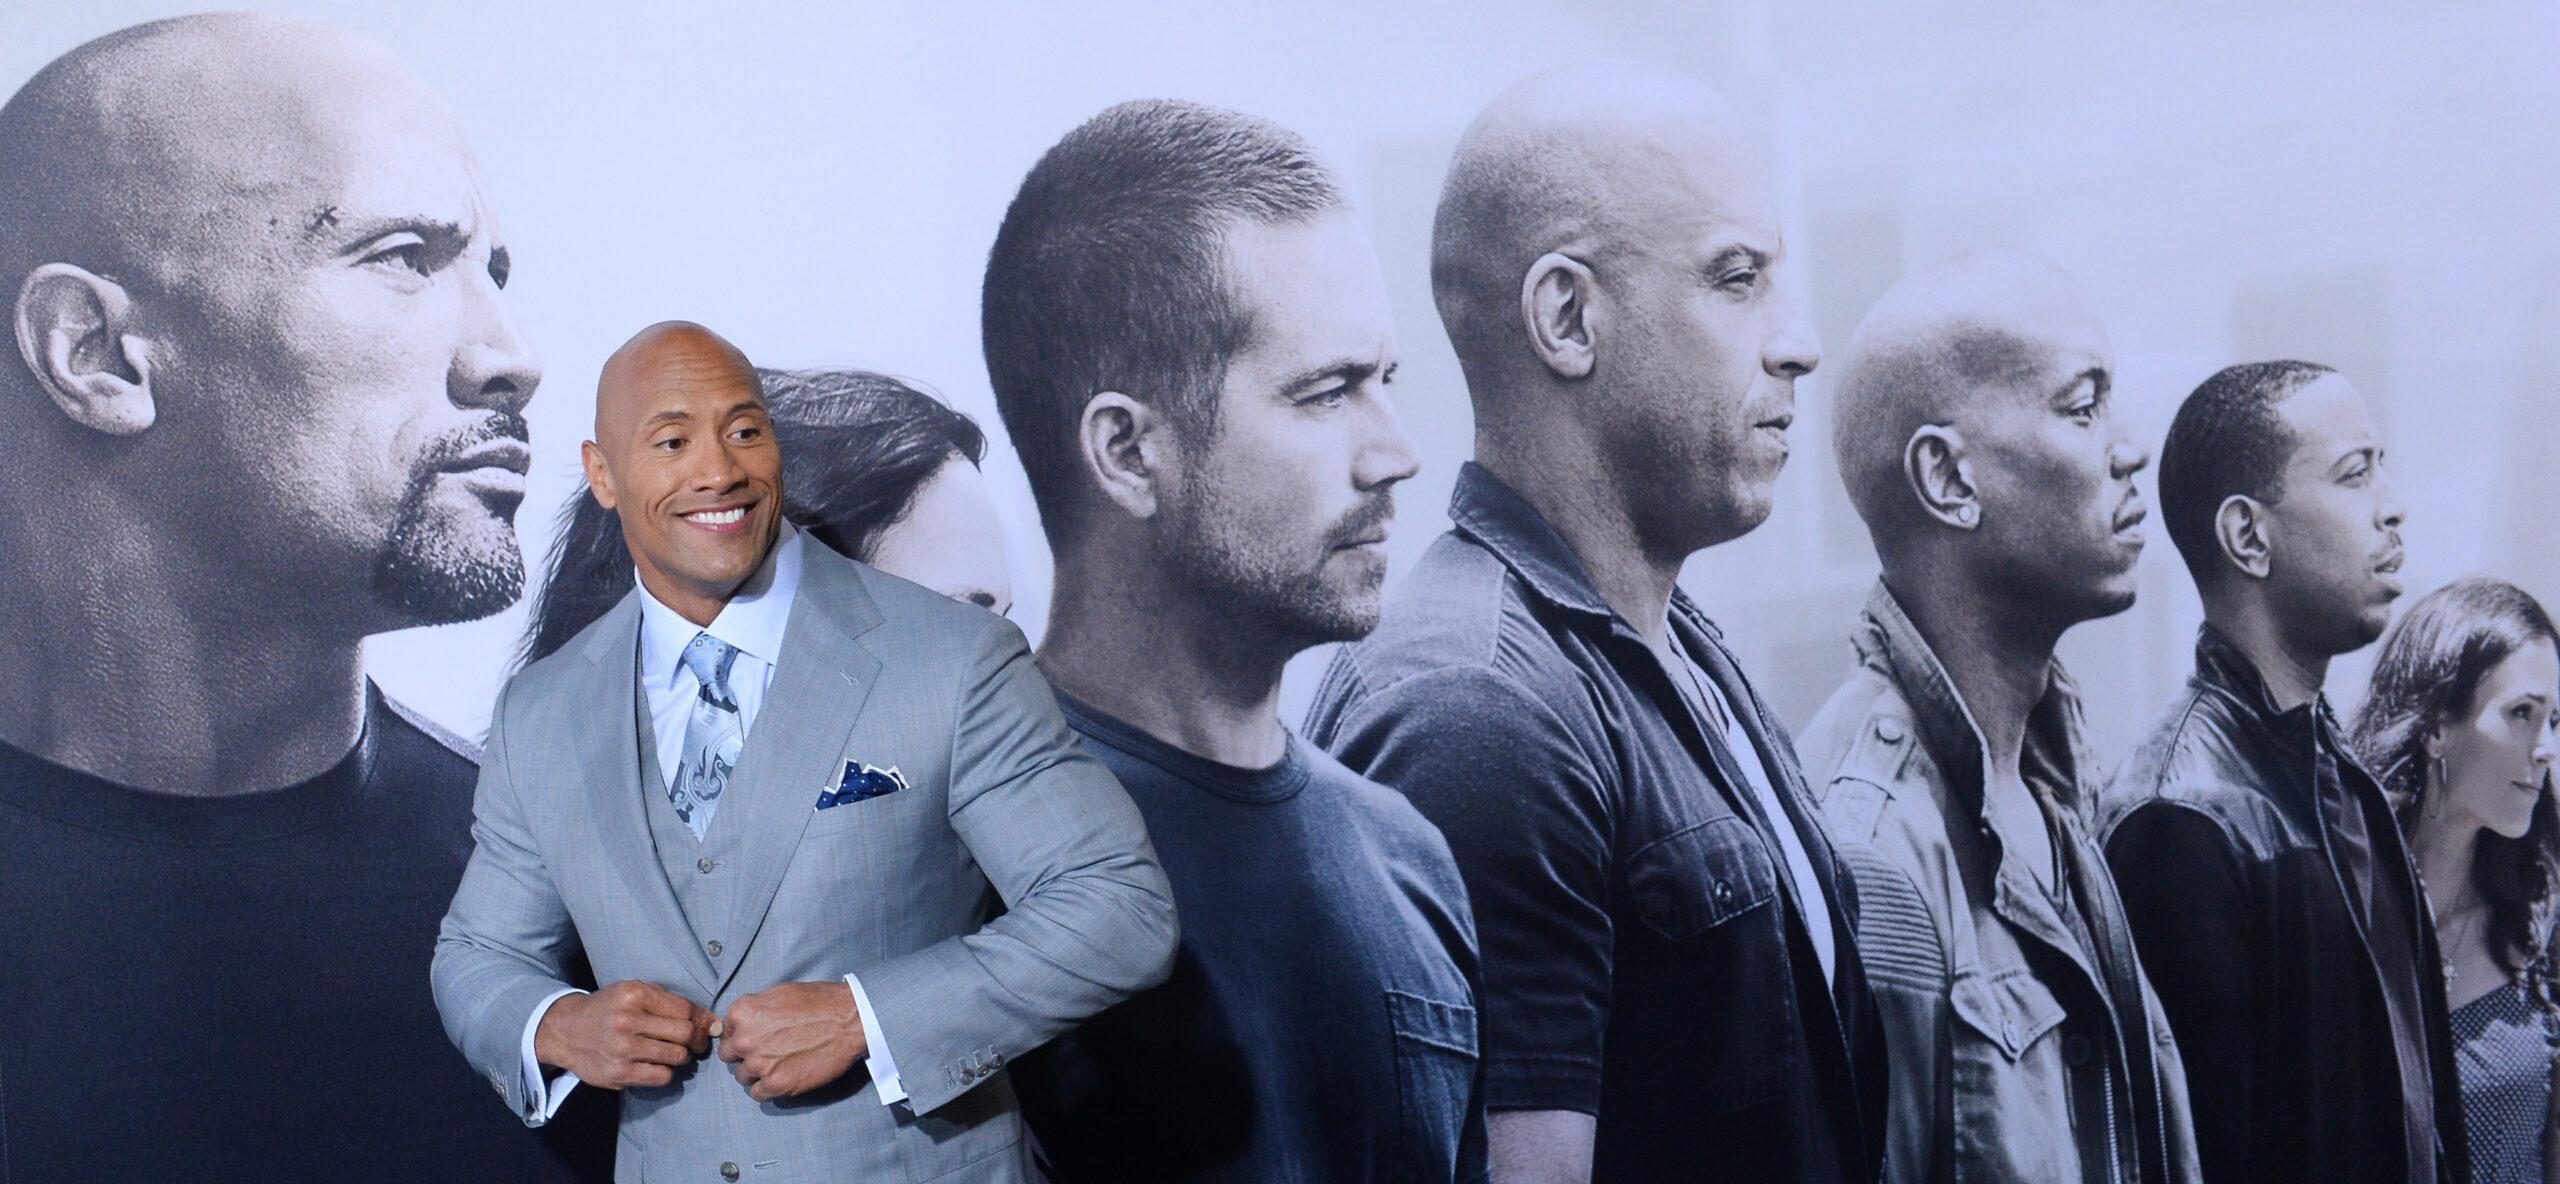 Dwayne Johnson To Return As Hobbs In 'Fast & Furious' Franchise After Making Peace With Vin Diesel